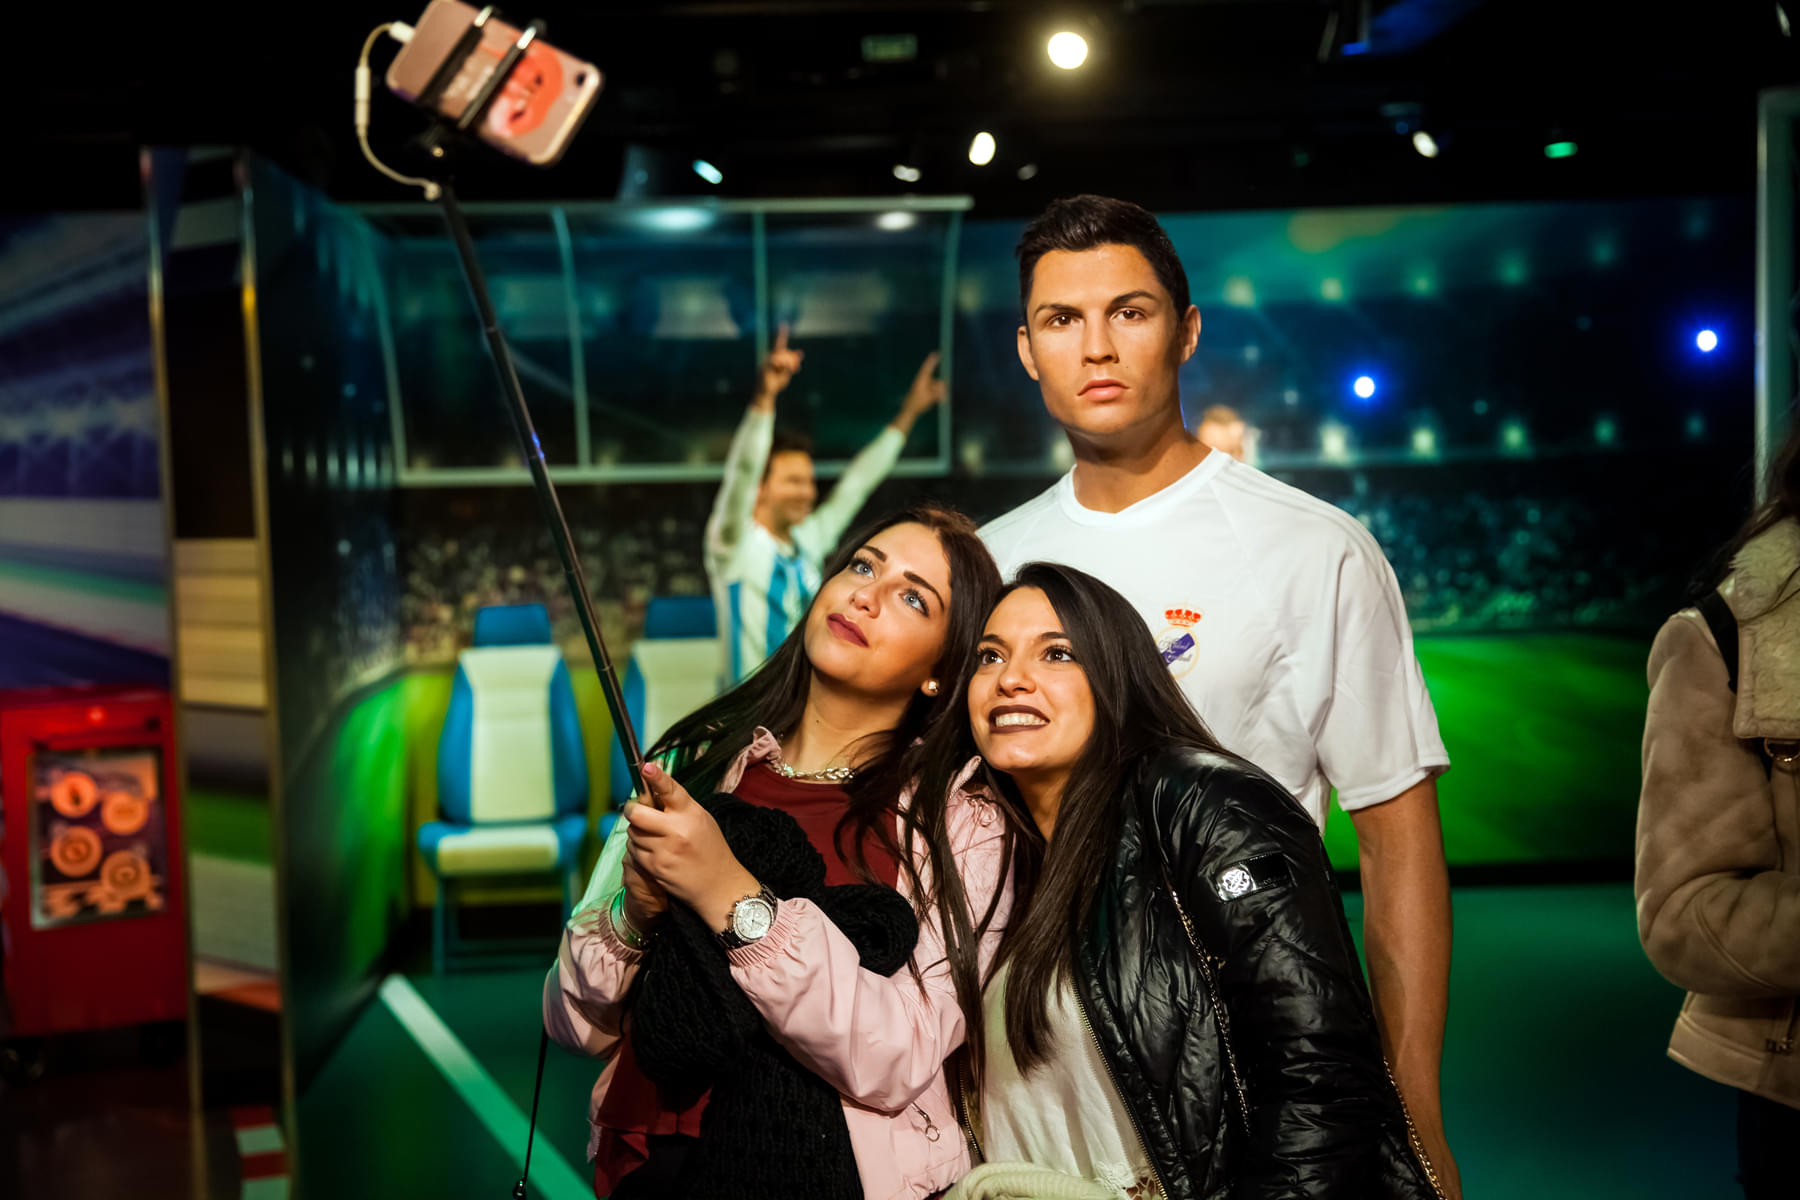 Have a memorable experience at Madame Tussauds Amsterdam